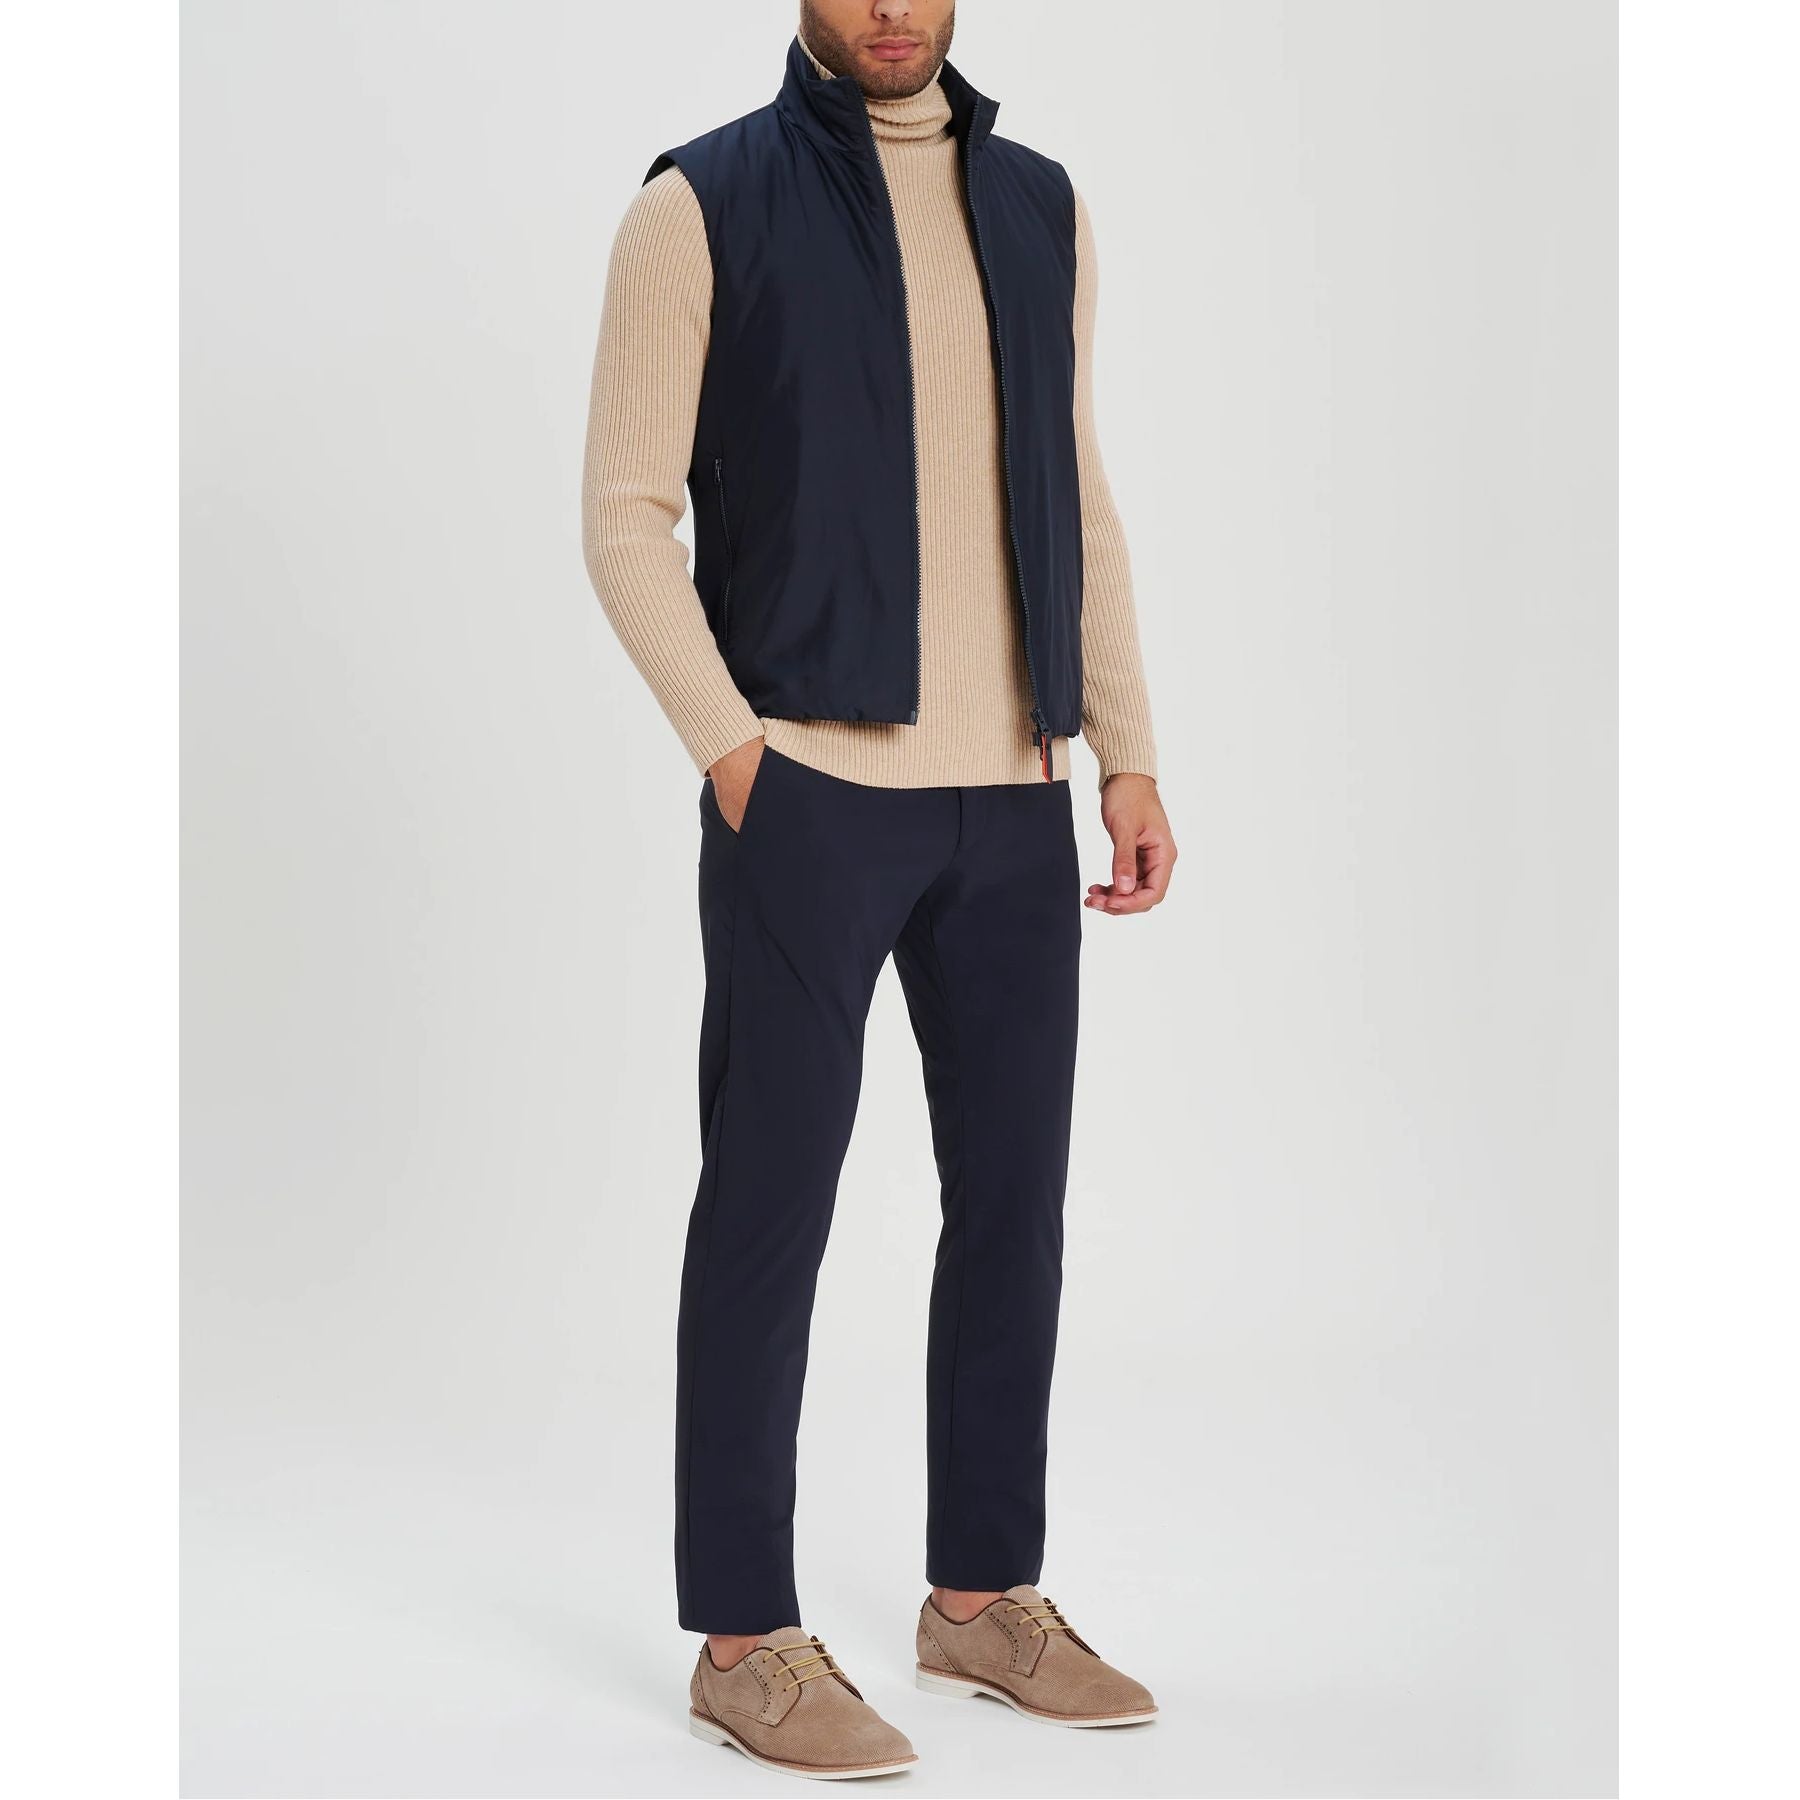 Noah Active Trousers in Navy (Trim Tapered Fit) by Zanella